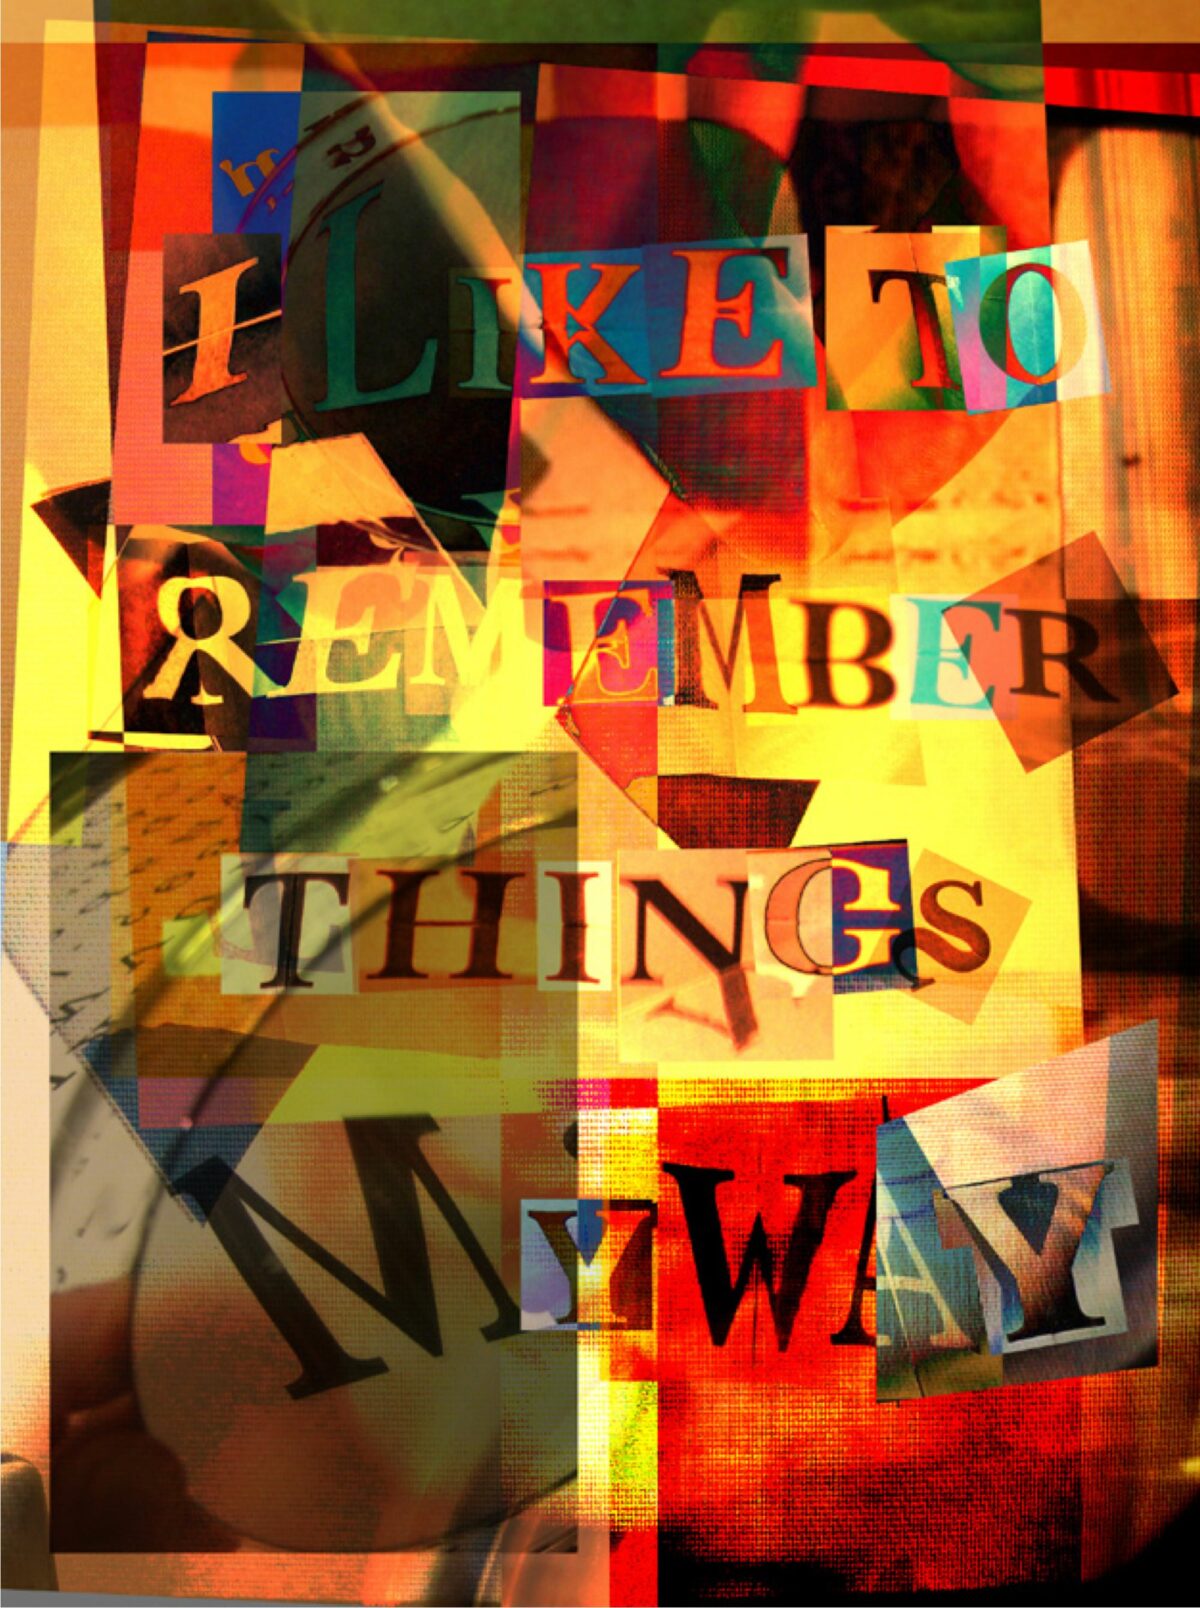 “I like to remember things my way” [distorted mirror type]